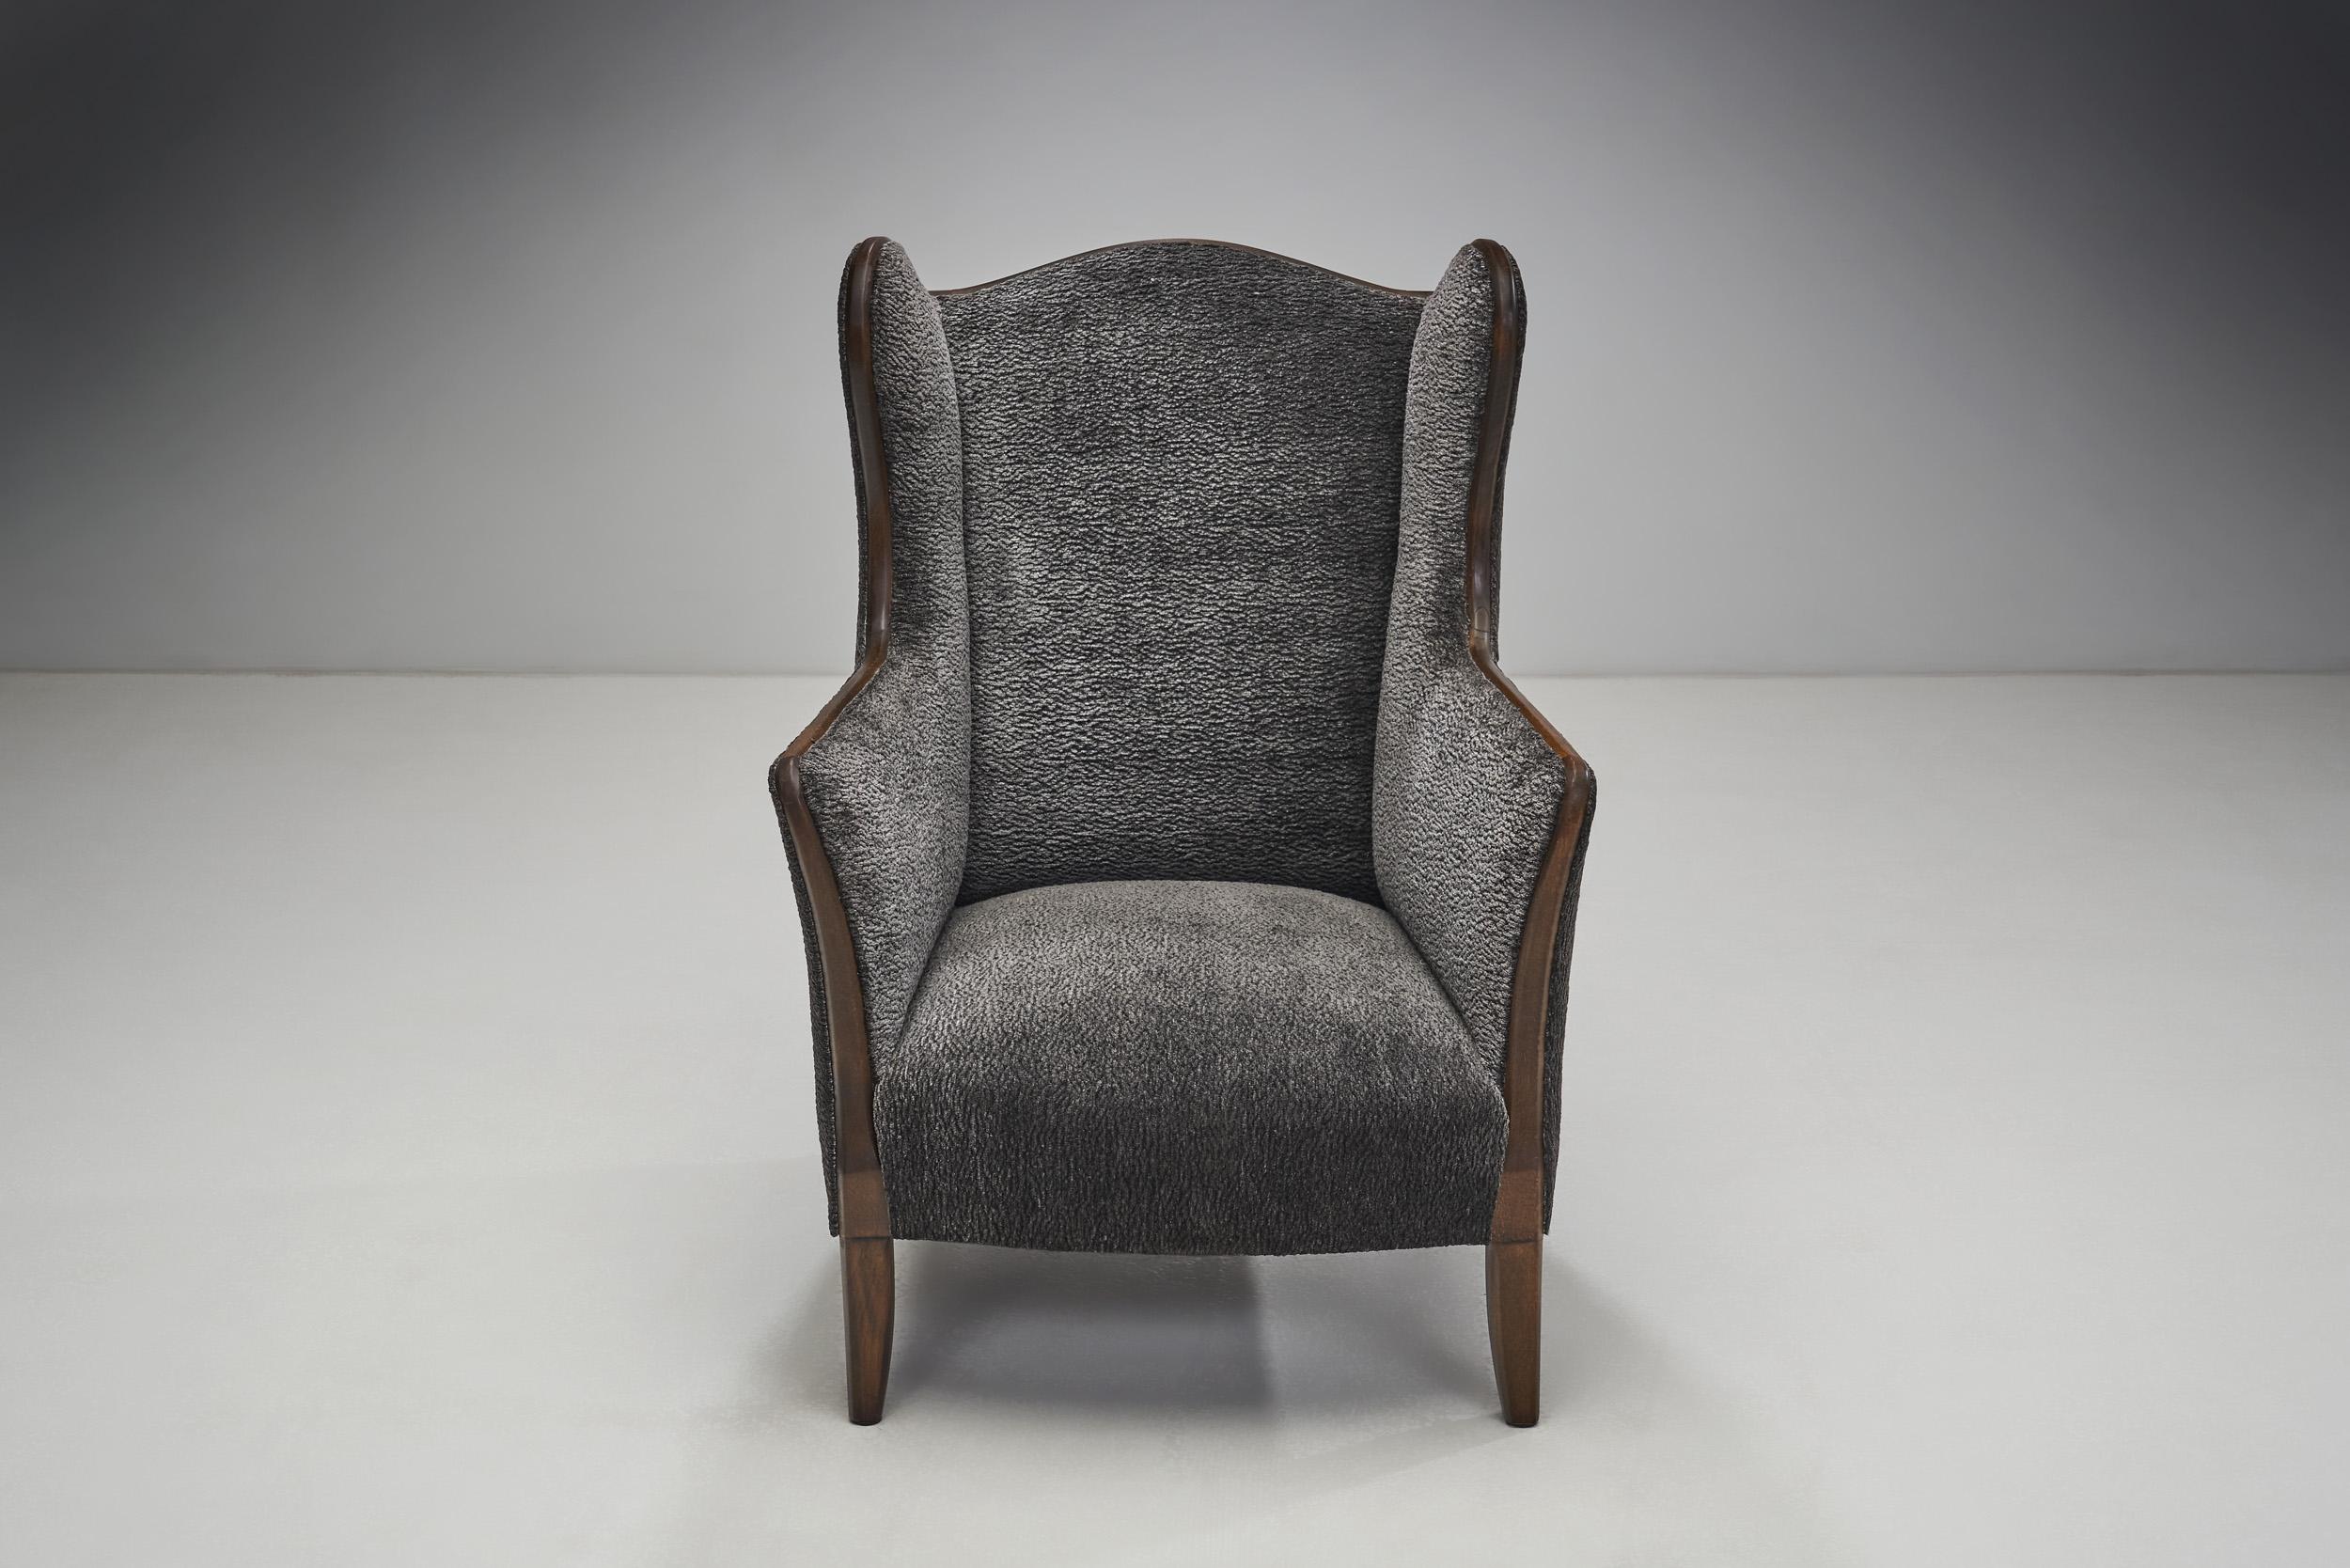 Mid-20th Century Danish Cabinetmaker Wingback Chair with Beech Frame, Denmark, ca 1950s For Sale